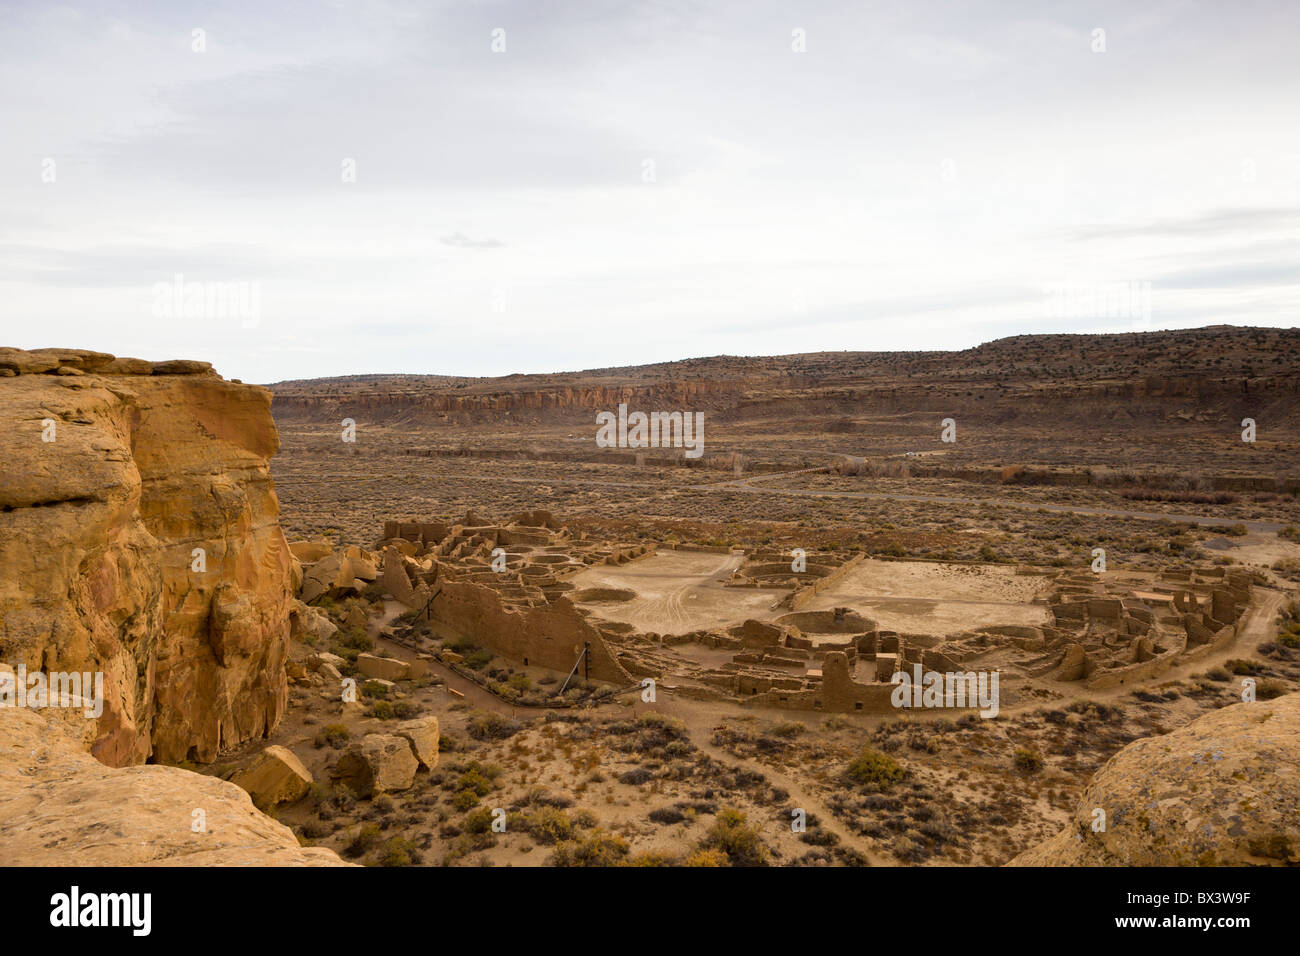 View of Pueblo Bonito from the Pueblo Alto trail in The Chaco Culture National Historic Park in Chaco Canyon, New Mexico USA. Stock Photo